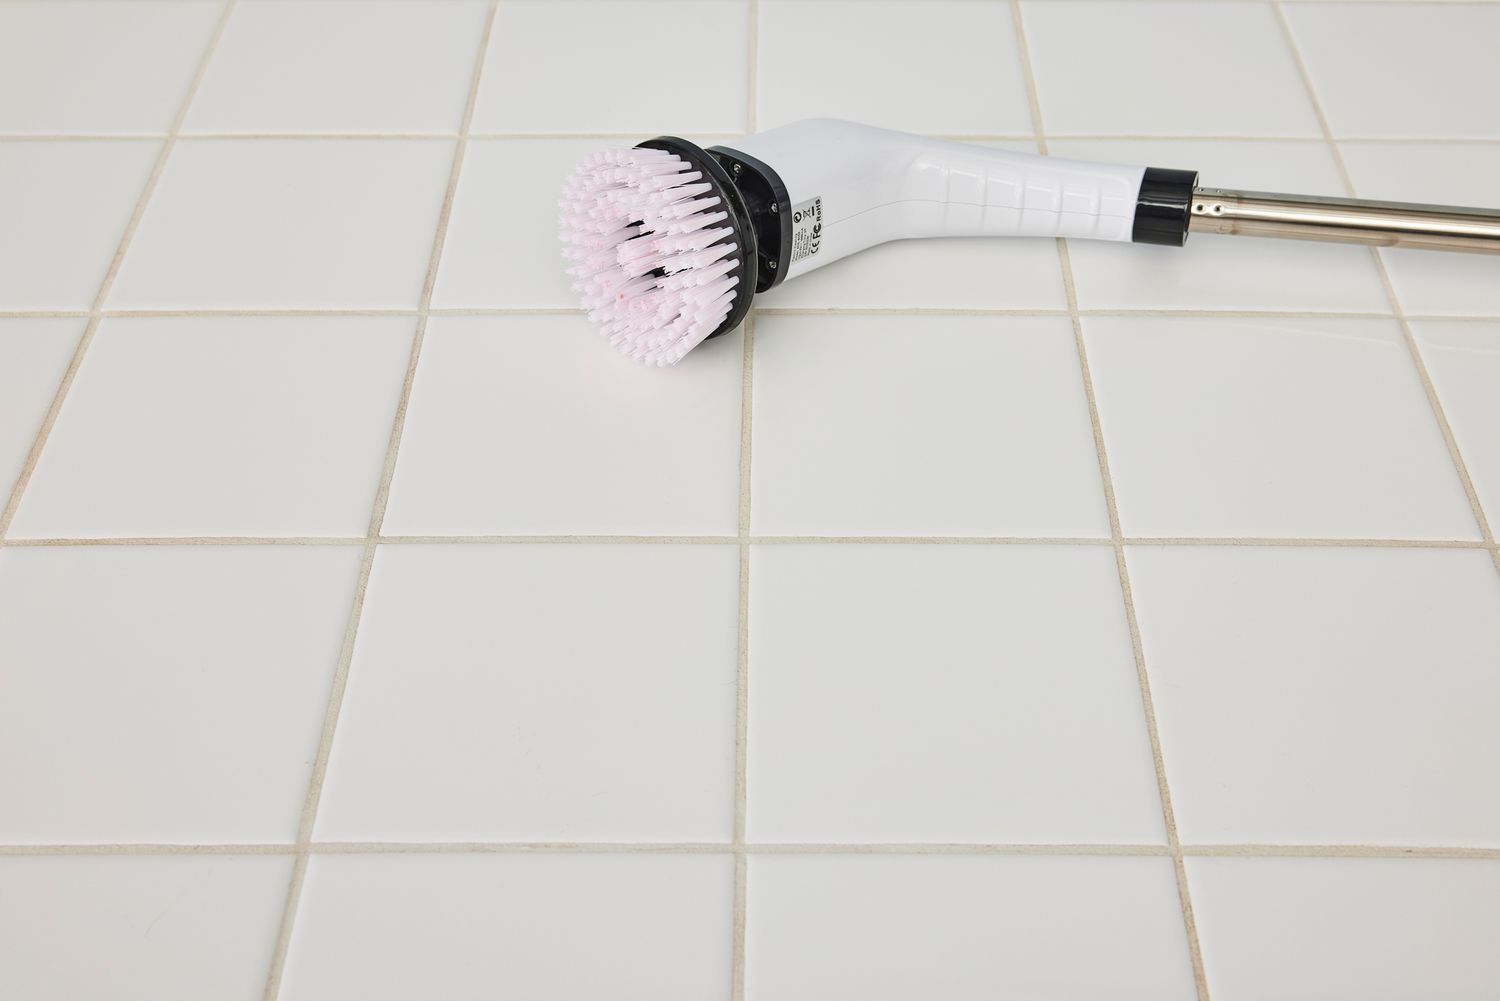 A Losuy Electric Spin Scrubber lying on its side on white tile